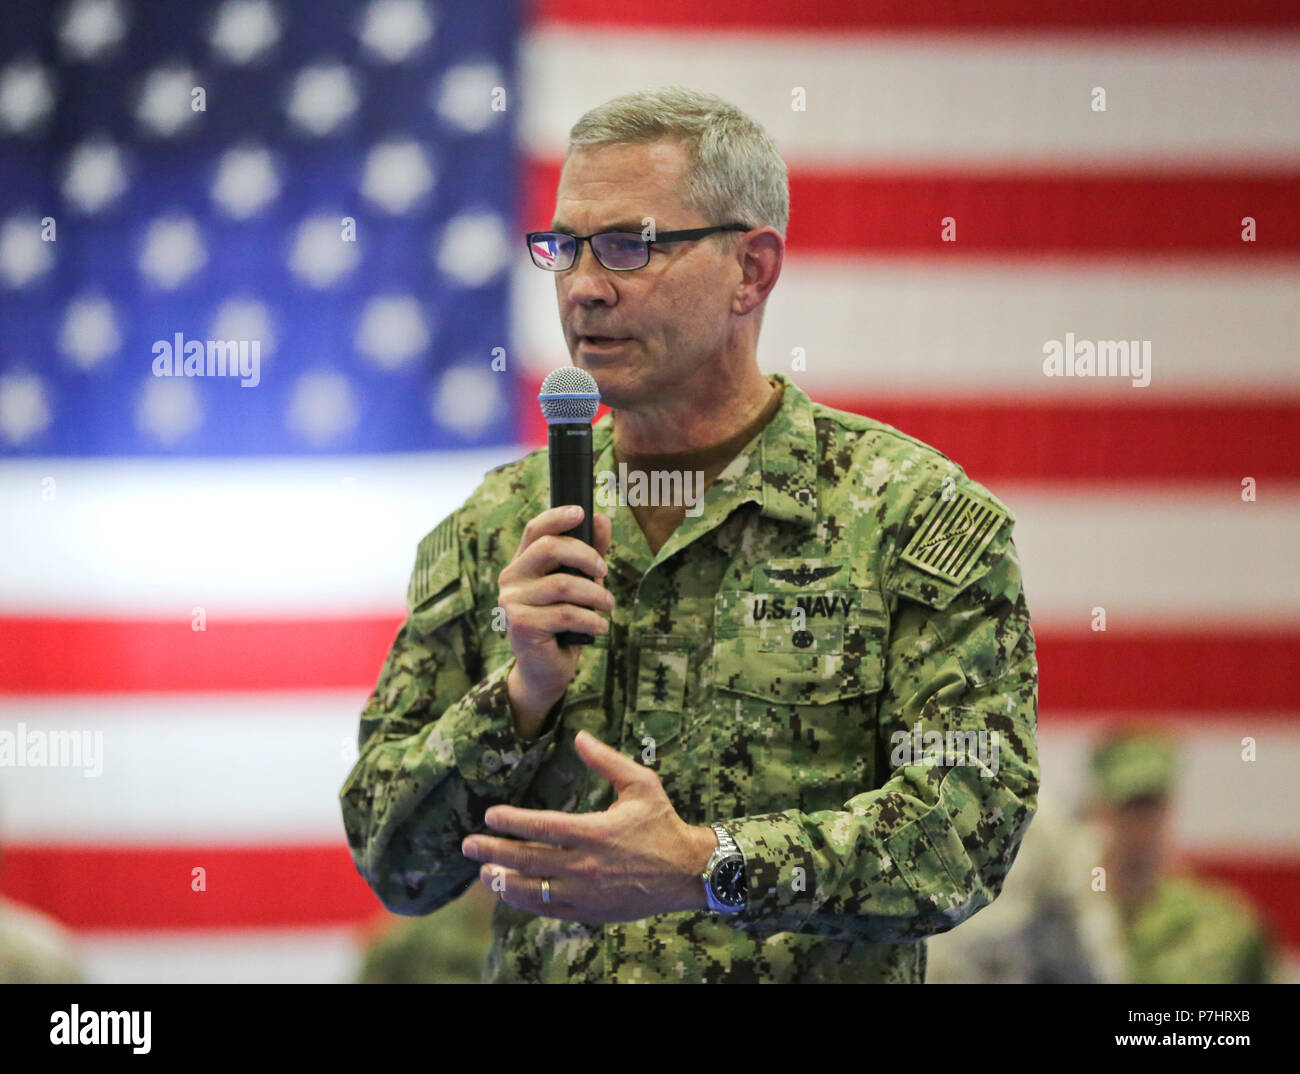 180703-M-AR450-1119 NAVAL SUPPORT ACTIVITY BAHRAIN (July 3, 2018) U.S. Navy Vice Adm. Scott A. Stearney, commander of U.S. Naval Forces Central Command/U.S. 5th Fleet/Combined Maritime Forces, delivers remarks during the Naval Amphibious Force, Task Force 51/5th Marine Expeditionary Brigade (TF 51/5) change of command ceremony. Brig. Gen. Matthew G. Trollinger relieved Brig. Gen. Francis L. Donovan, who served as the commanding general of TF 51/5 since July 2016. (U.S. Marine Corps photo by Sgt. Wesley Timm/Released) Stock Photo